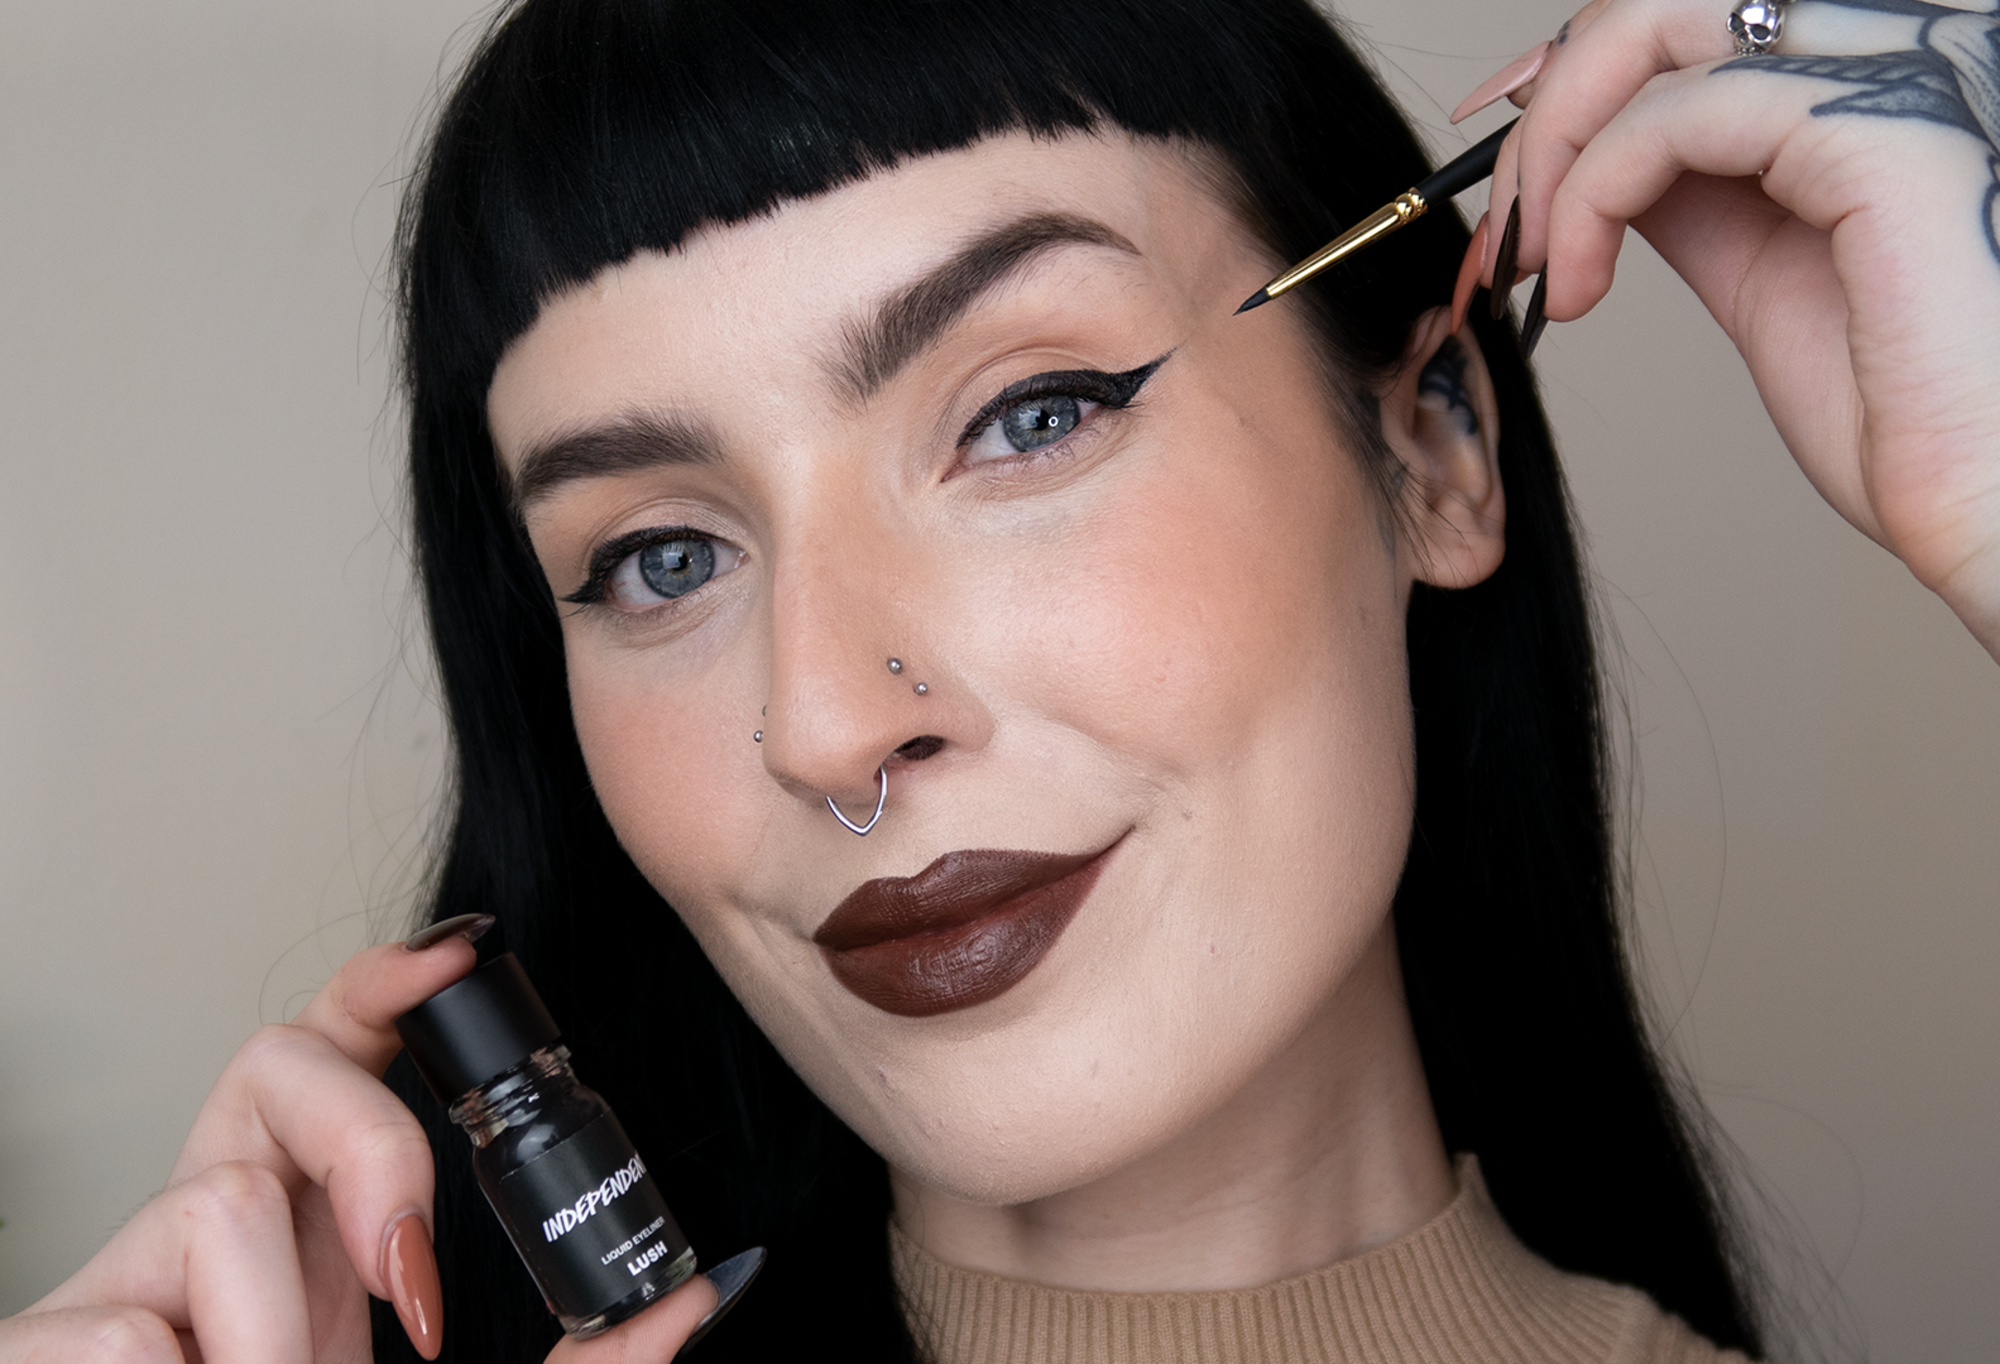 A person with dark hair and black winged eyeliner smiles, posing with a Get In There Brush and Independent eyeliner in hand.